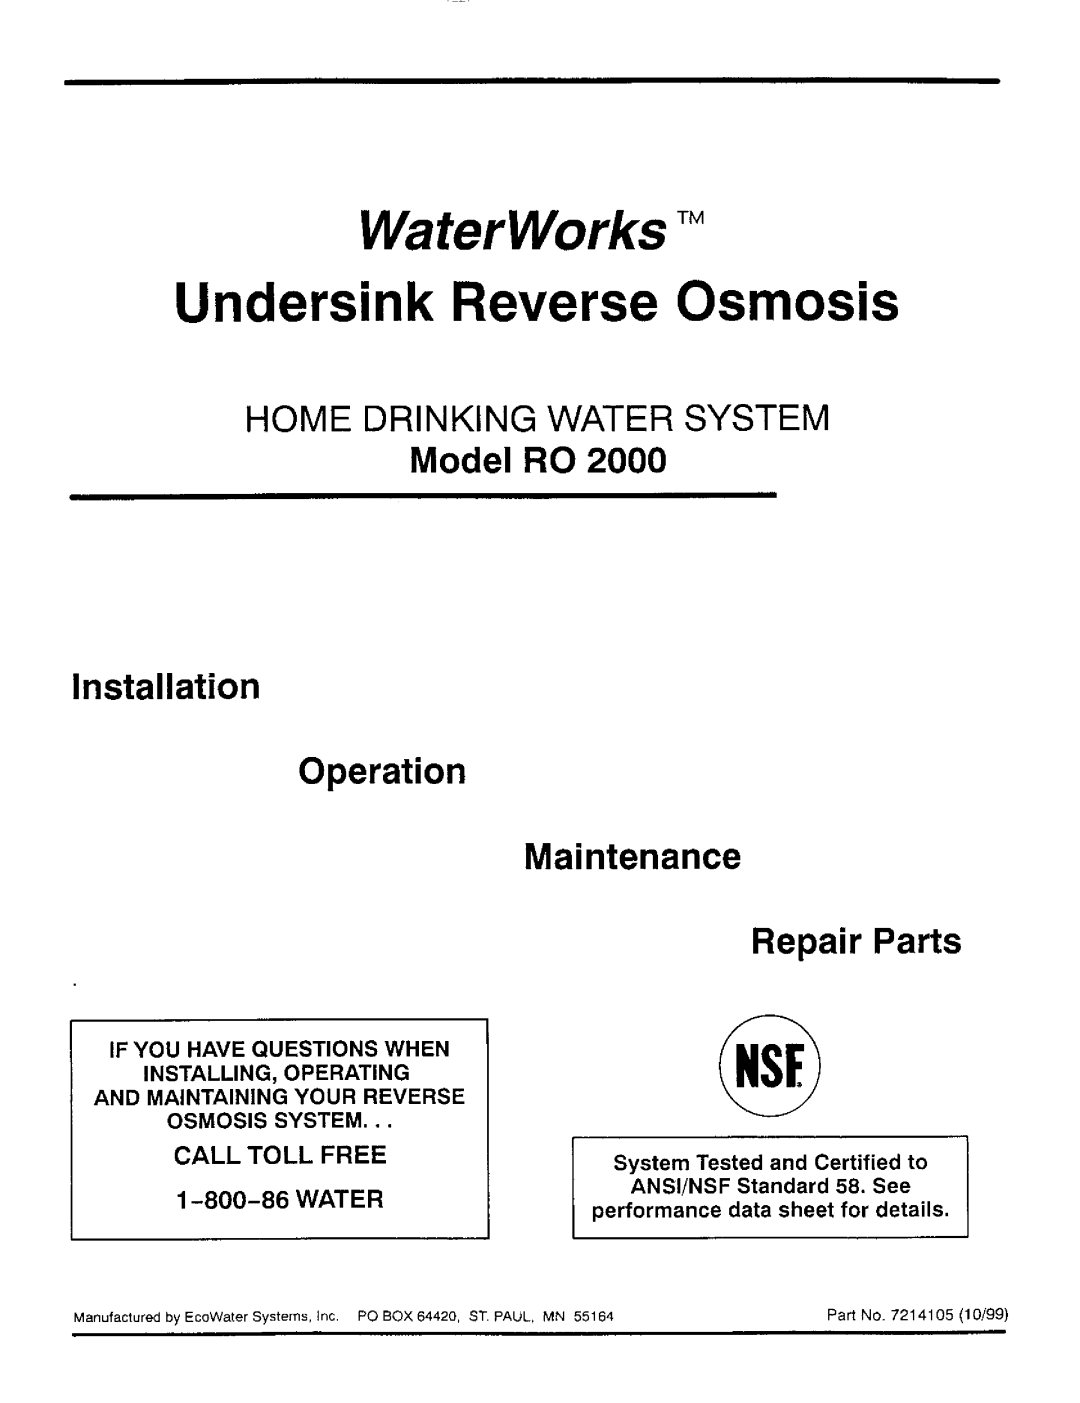 Sears RO 2000 manual Home Drinking Water System, CALL TOLL FREE 1-800-86 WATER, WaterWorks TM, Undersink Reverse Osmosis 